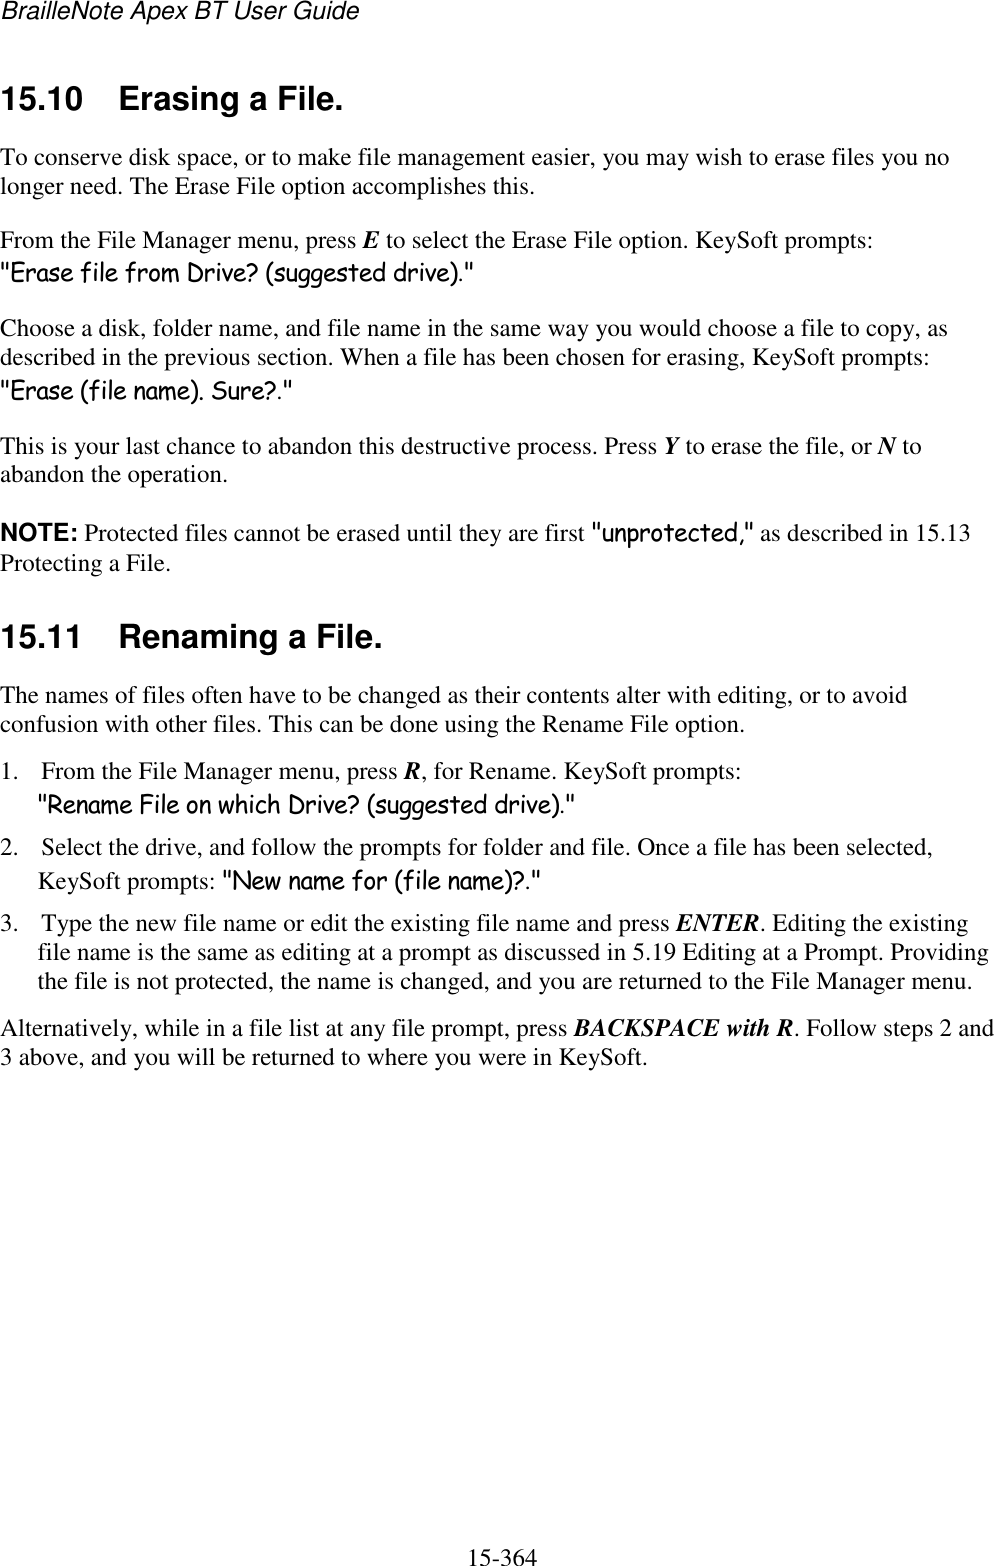 BrailleNote Apex BT User Guide   15-364   15.10  Erasing a File. To conserve disk space, or to make file management easier, you may wish to erase files you no longer need. The Erase File option accomplishes this. From the File Manager menu, press E to select the Erase File option. KeySoft prompts: &quot;Erase file from Drive? (suggested drive).&quot; Choose a disk, folder name, and file name in the same way you would choose a file to copy, as described in the previous section. When a file has been chosen for erasing, KeySoft prompts: &quot;Erase (file name). Sure?.&quot; This is your last chance to abandon this destructive process. Press Y to erase the file, or N to abandon the operation. NOTE: Protected files cannot be erased until they are first &quot;unprotected,&quot; as described in 15.13 Protecting a File.  15.11  Renaming a File. The names of files often have to be changed as their contents alter with editing, or to avoid confusion with other files. This can be done using the Rename File option.  1. From the File Manager menu, press R, for Rename. KeySoft prompts: &quot;Rename File on which Drive? (suggested drive).&quot; 2. Select the drive, and follow the prompts for folder and file. Once a file has been selected, KeySoft prompts: &quot;New name for (file name)?.&quot; 3. Type the new file name or edit the existing file name and press ENTER. Editing the existing file name is the same as editing at a prompt as discussed in 5.19 Editing at a Prompt. Providing the file is not protected, the name is changed, and you are returned to the File Manager menu. Alternatively, while in a file list at any file prompt, press BACKSPACE with R. Follow steps 2 and 3 above, and you will be returned to where you were in KeySoft.  